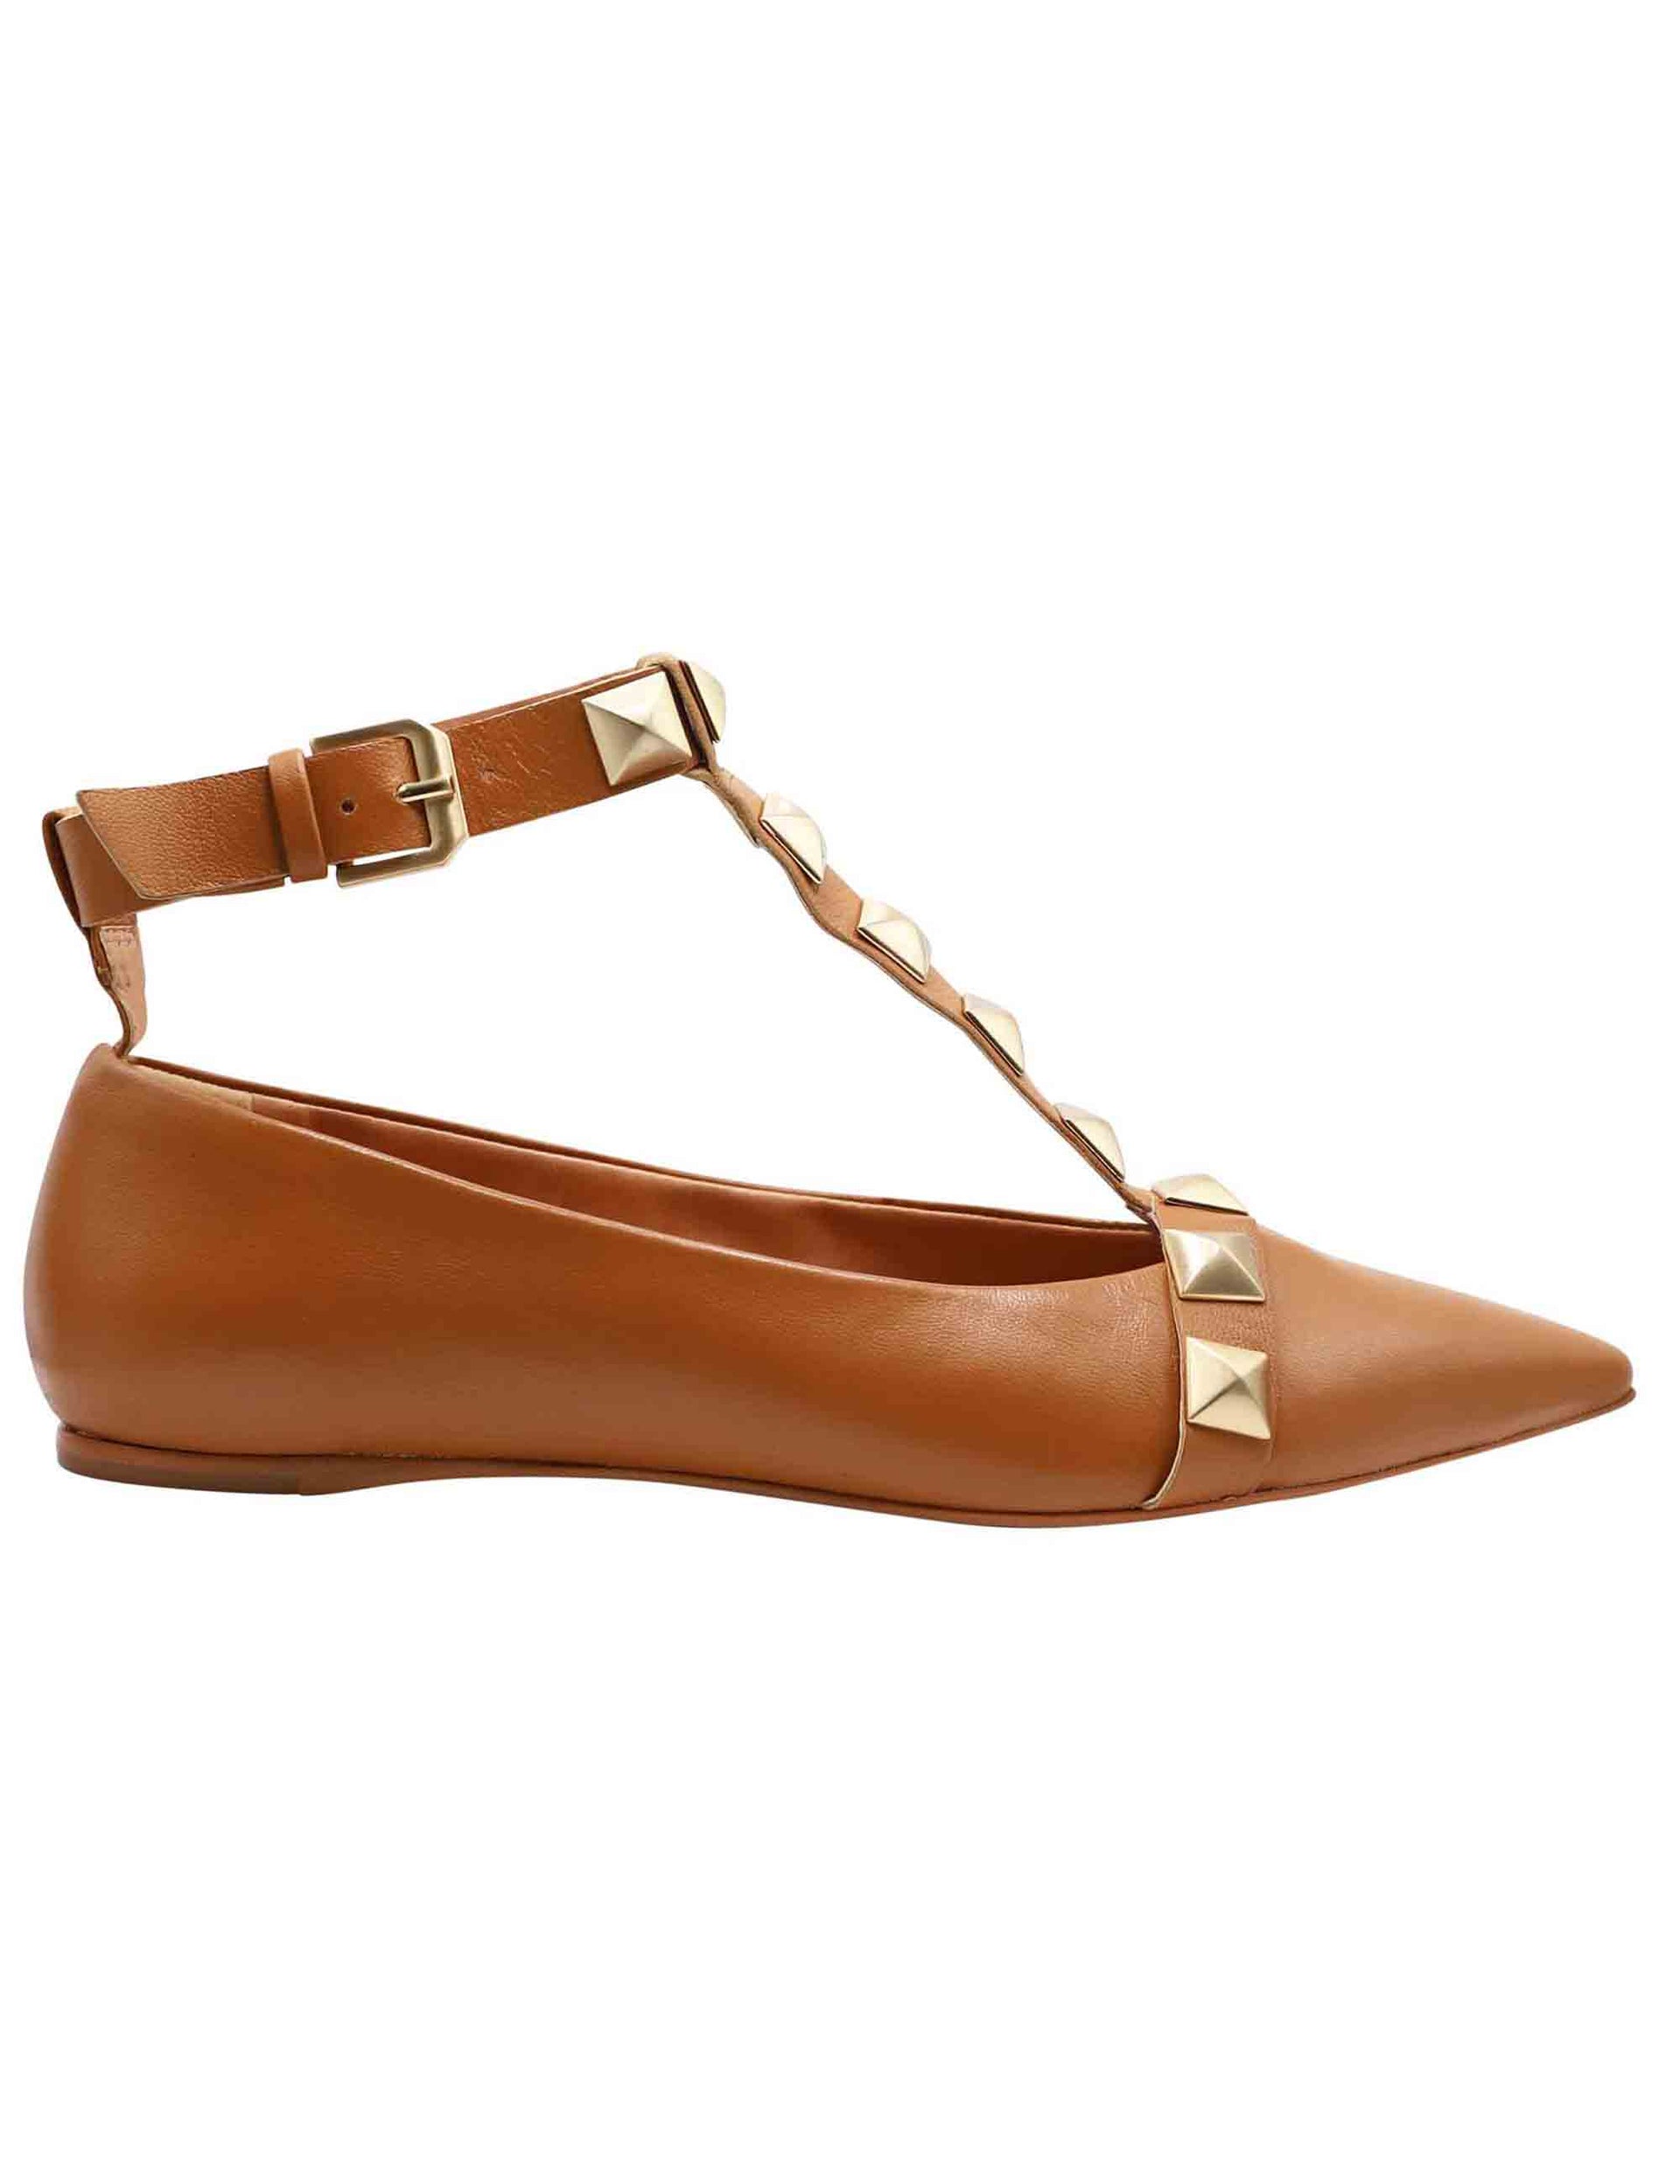 Women's tan leather ballet flats with pointed toe straps and studs